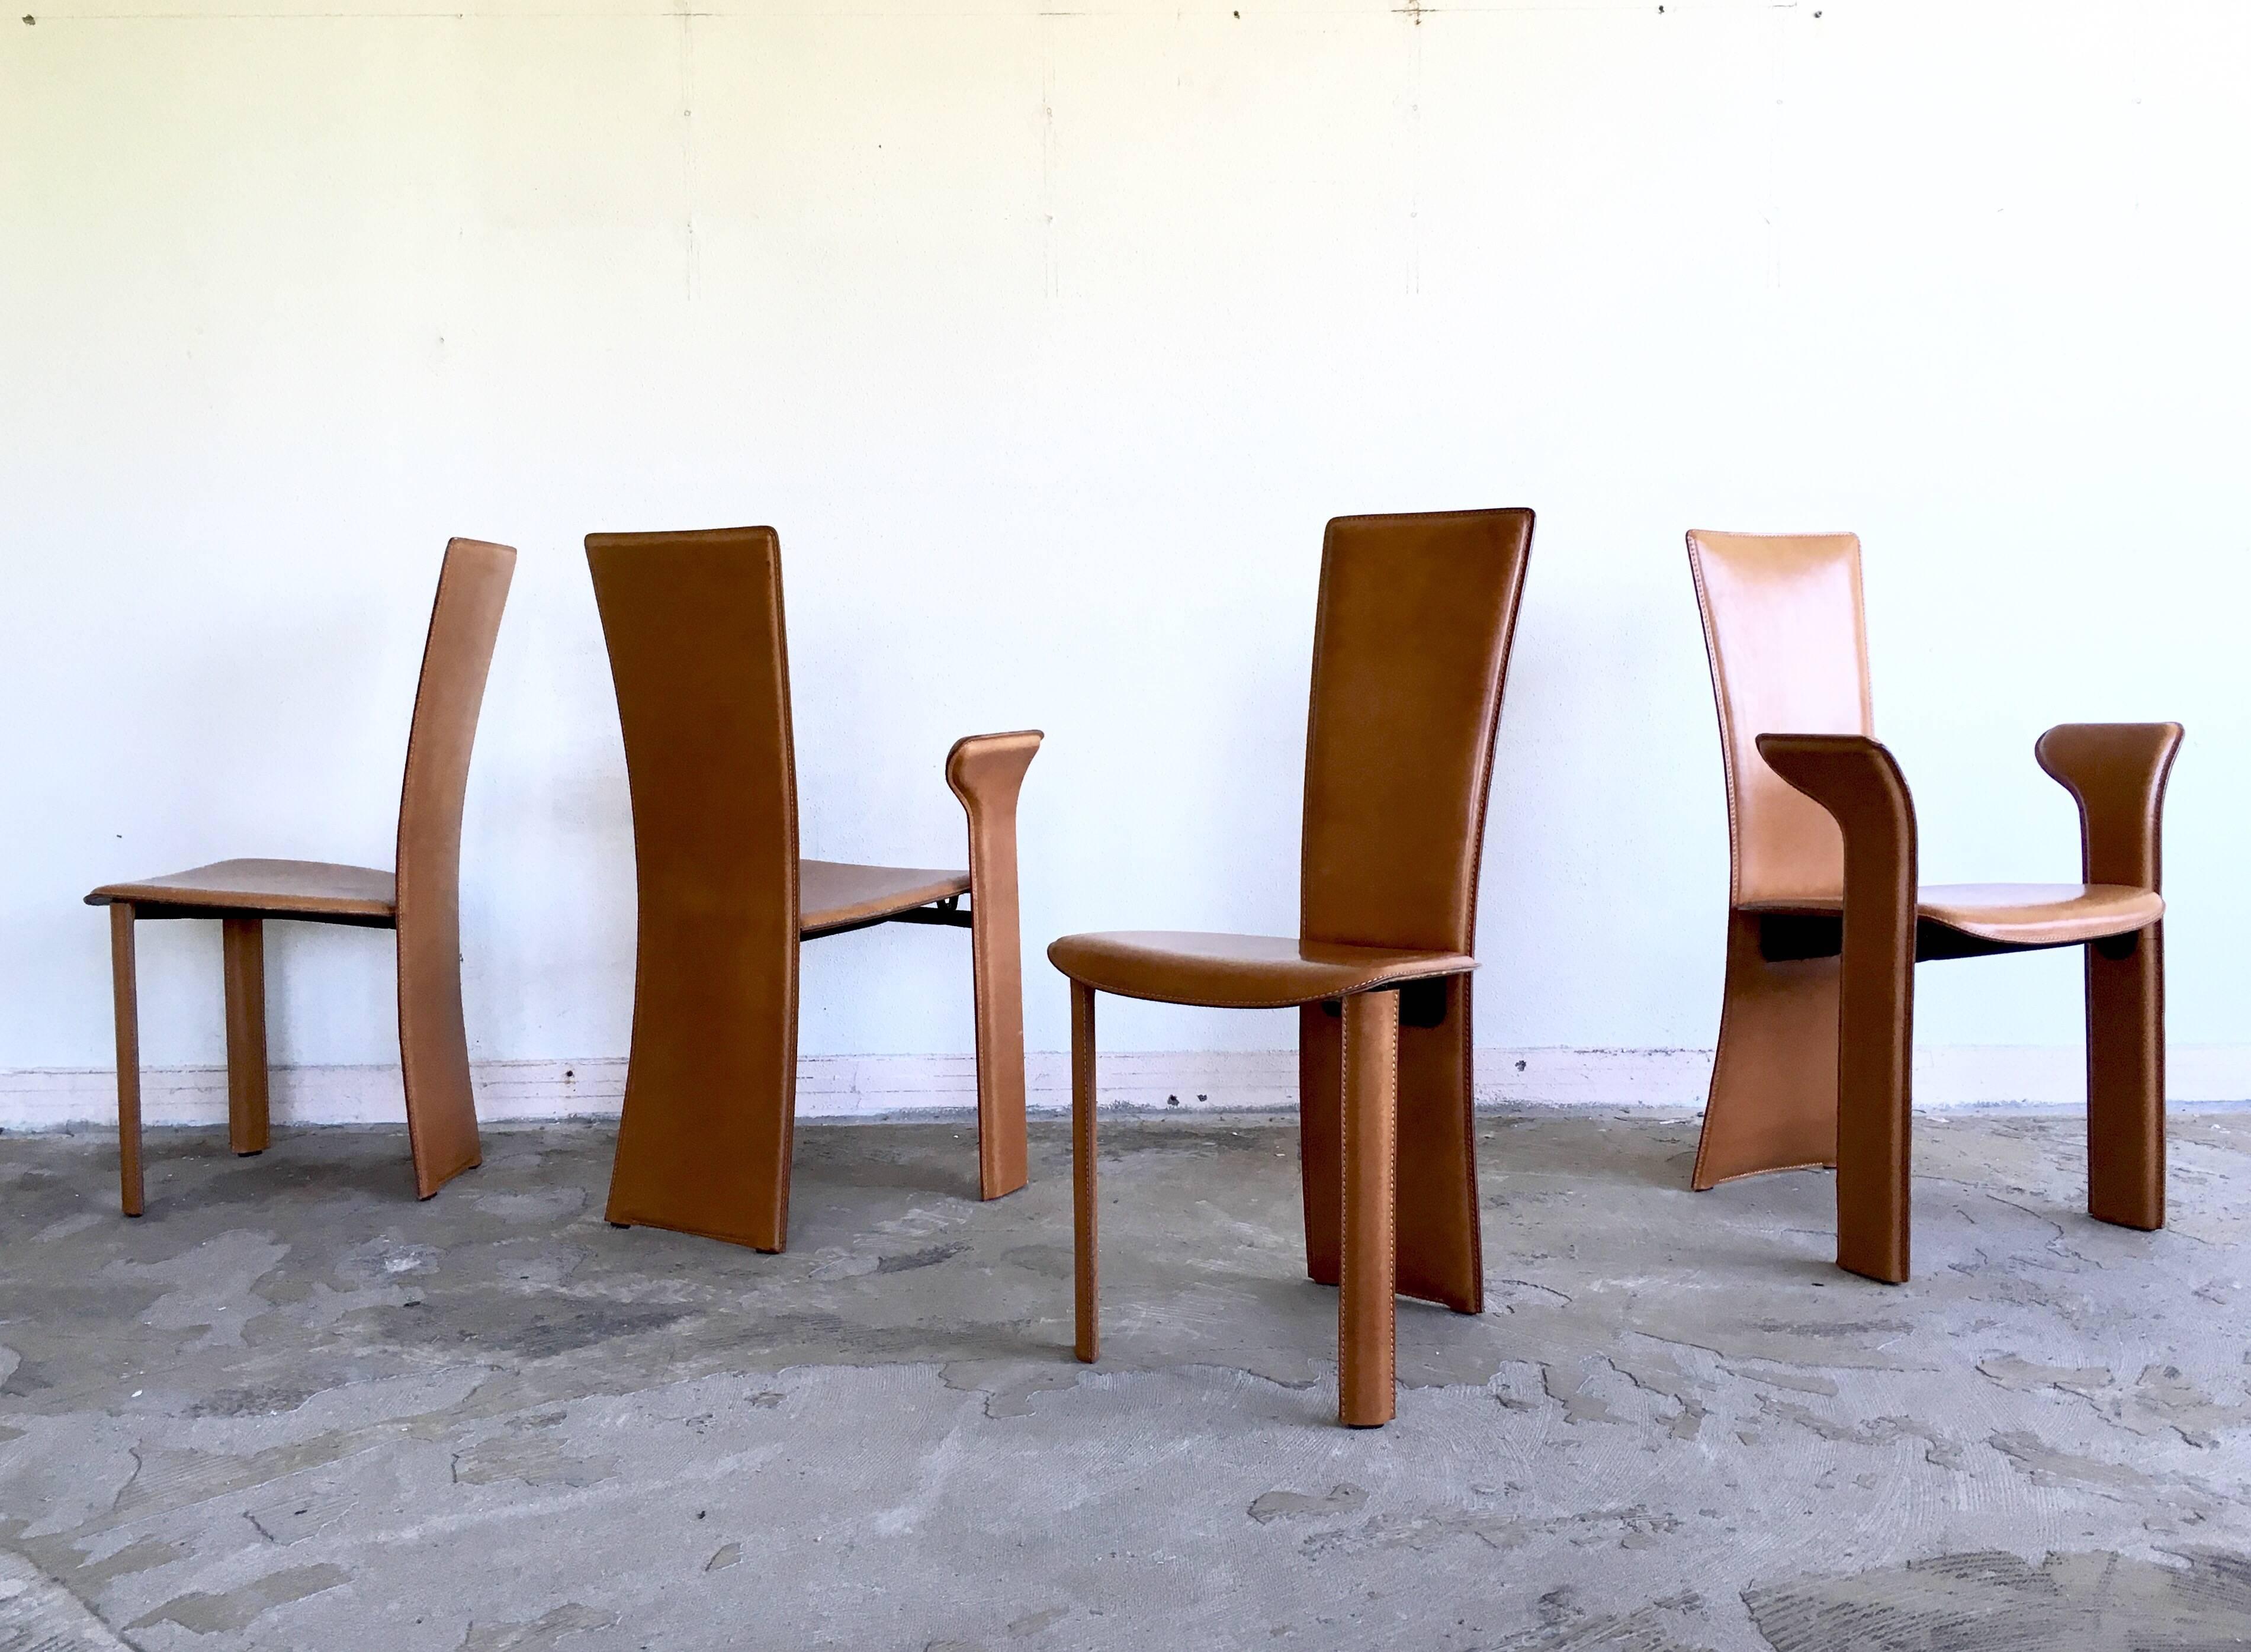 Gorgeous set of four dining chairs with thick leather upholstery. The chairs were manufactured by frag Italy and remain in good condition with wear consistent with age and use. Elegant and also industrial looking pieces. Marked and imprinted with